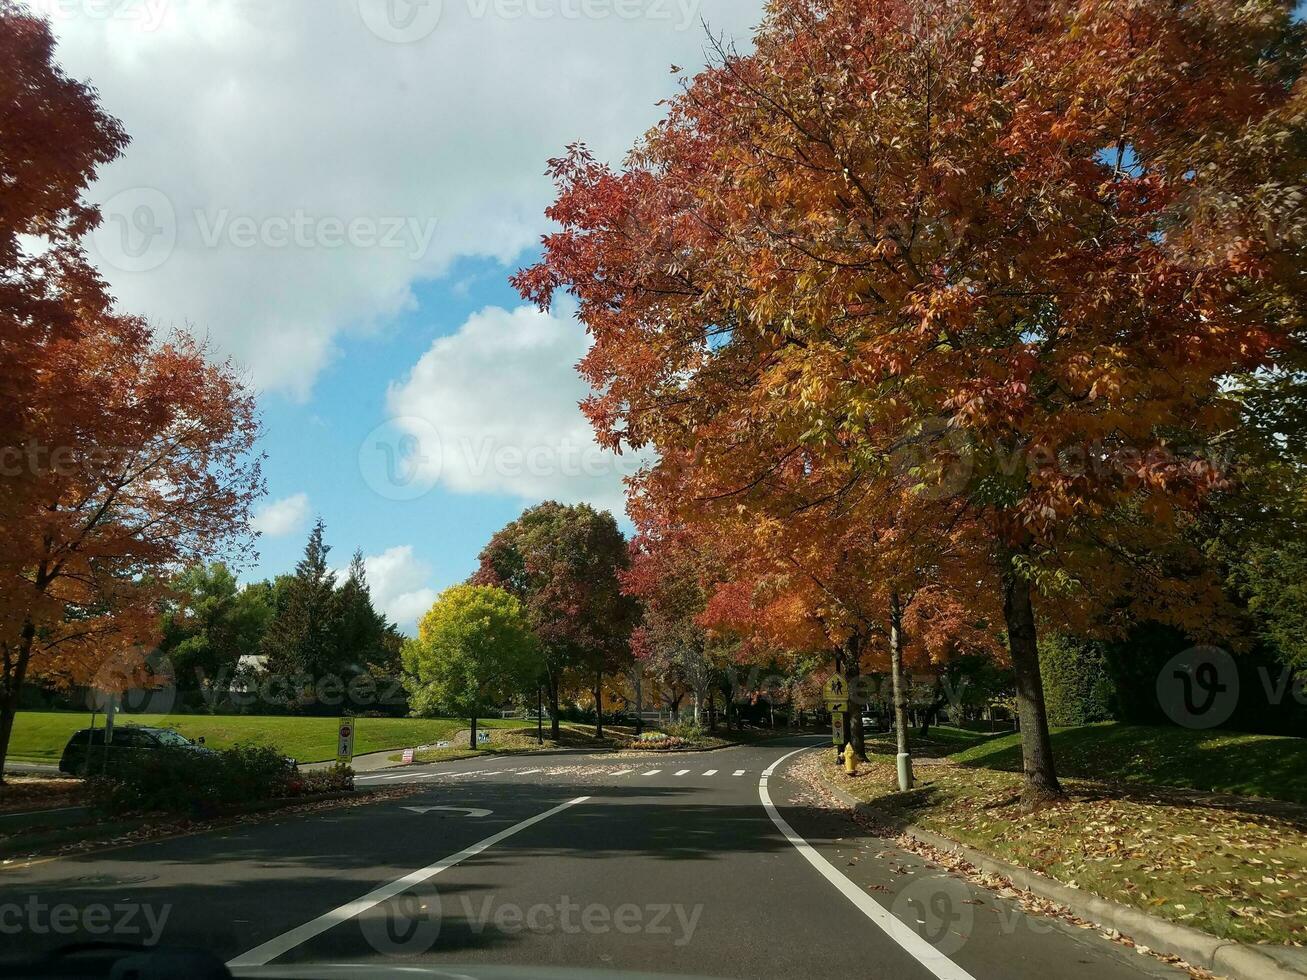 asphalt street with trees and orange and red leaves photo